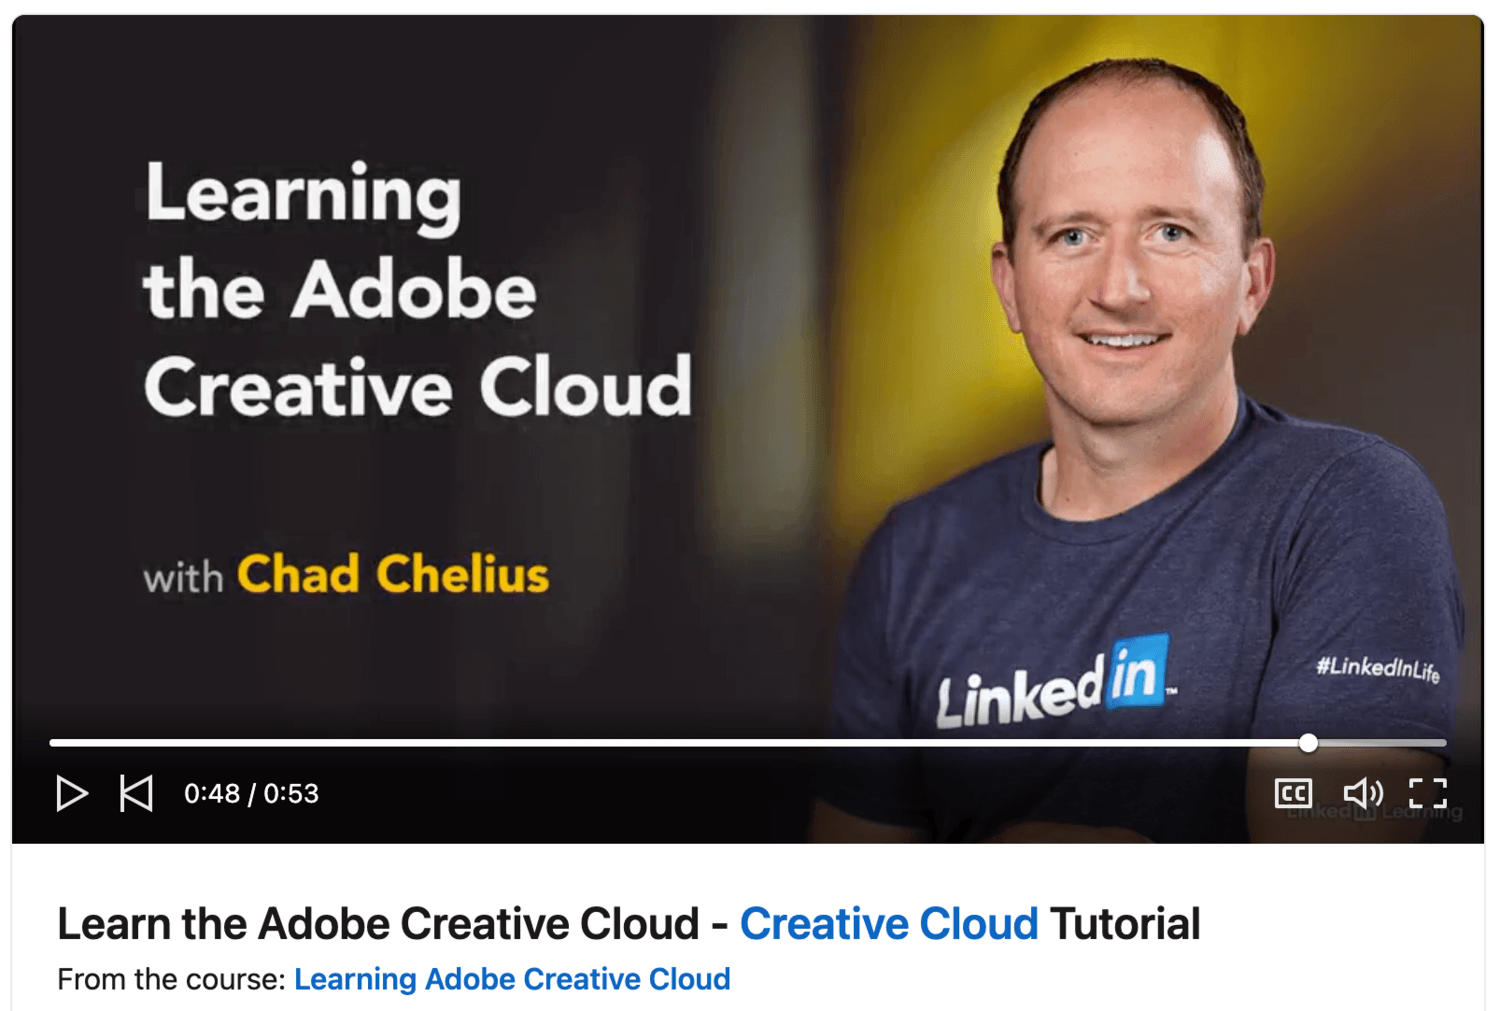 A screenshot of learning adobe creative cloud with Chad Chelius. An example of effective employee training videos